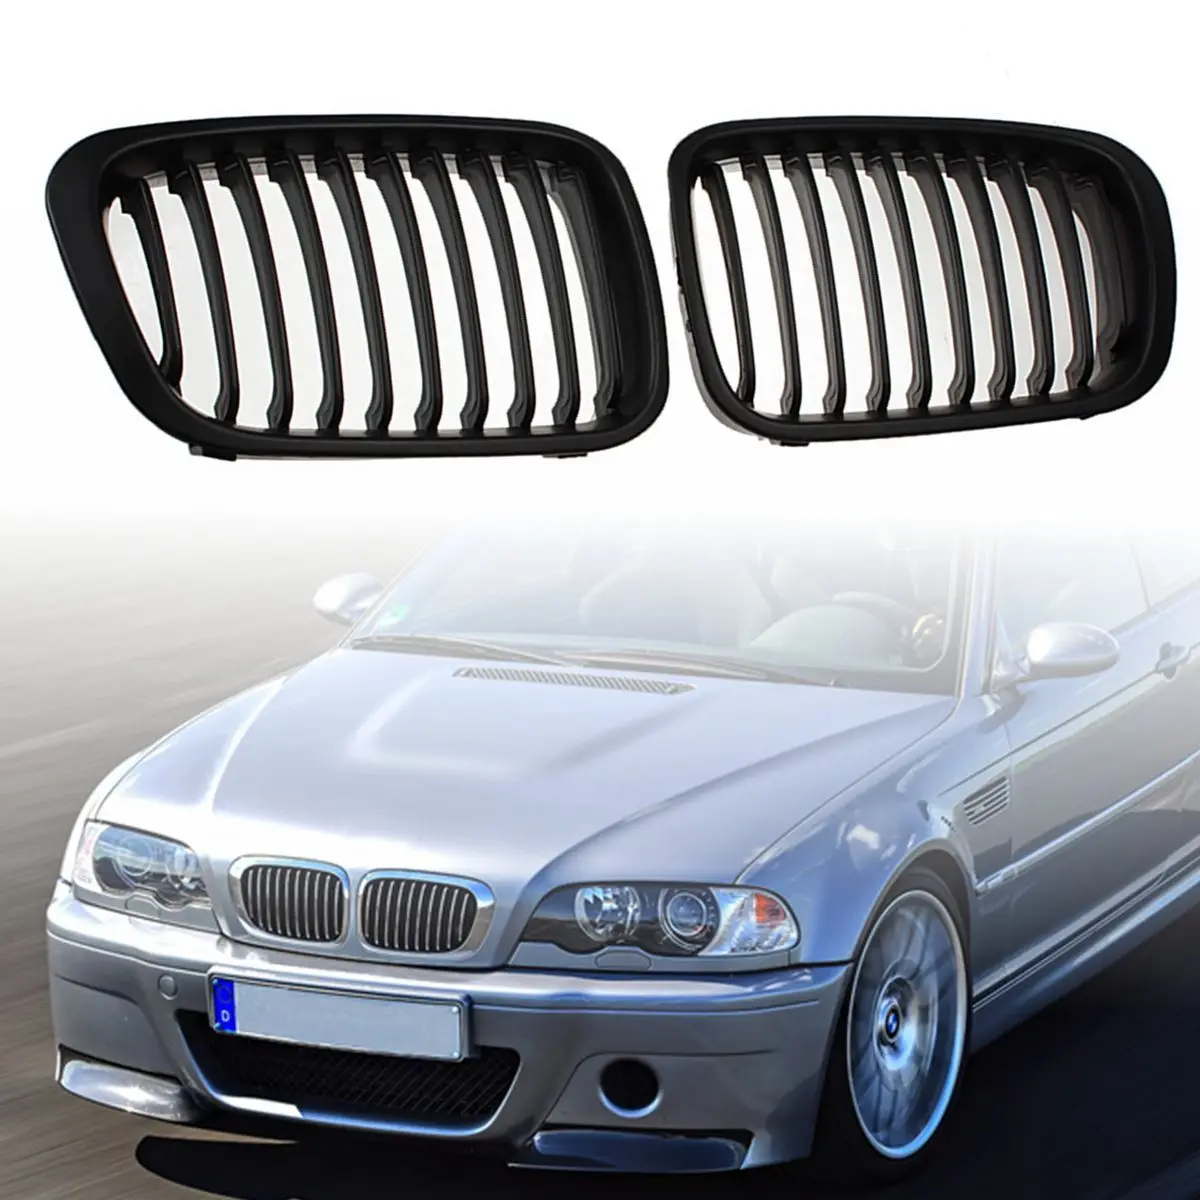 

Car Front Grilles for B-MW 1998-2001 E46 318I 320I 325I 330I Racing Grill Kidney Double Slat Matte Black New Replacement